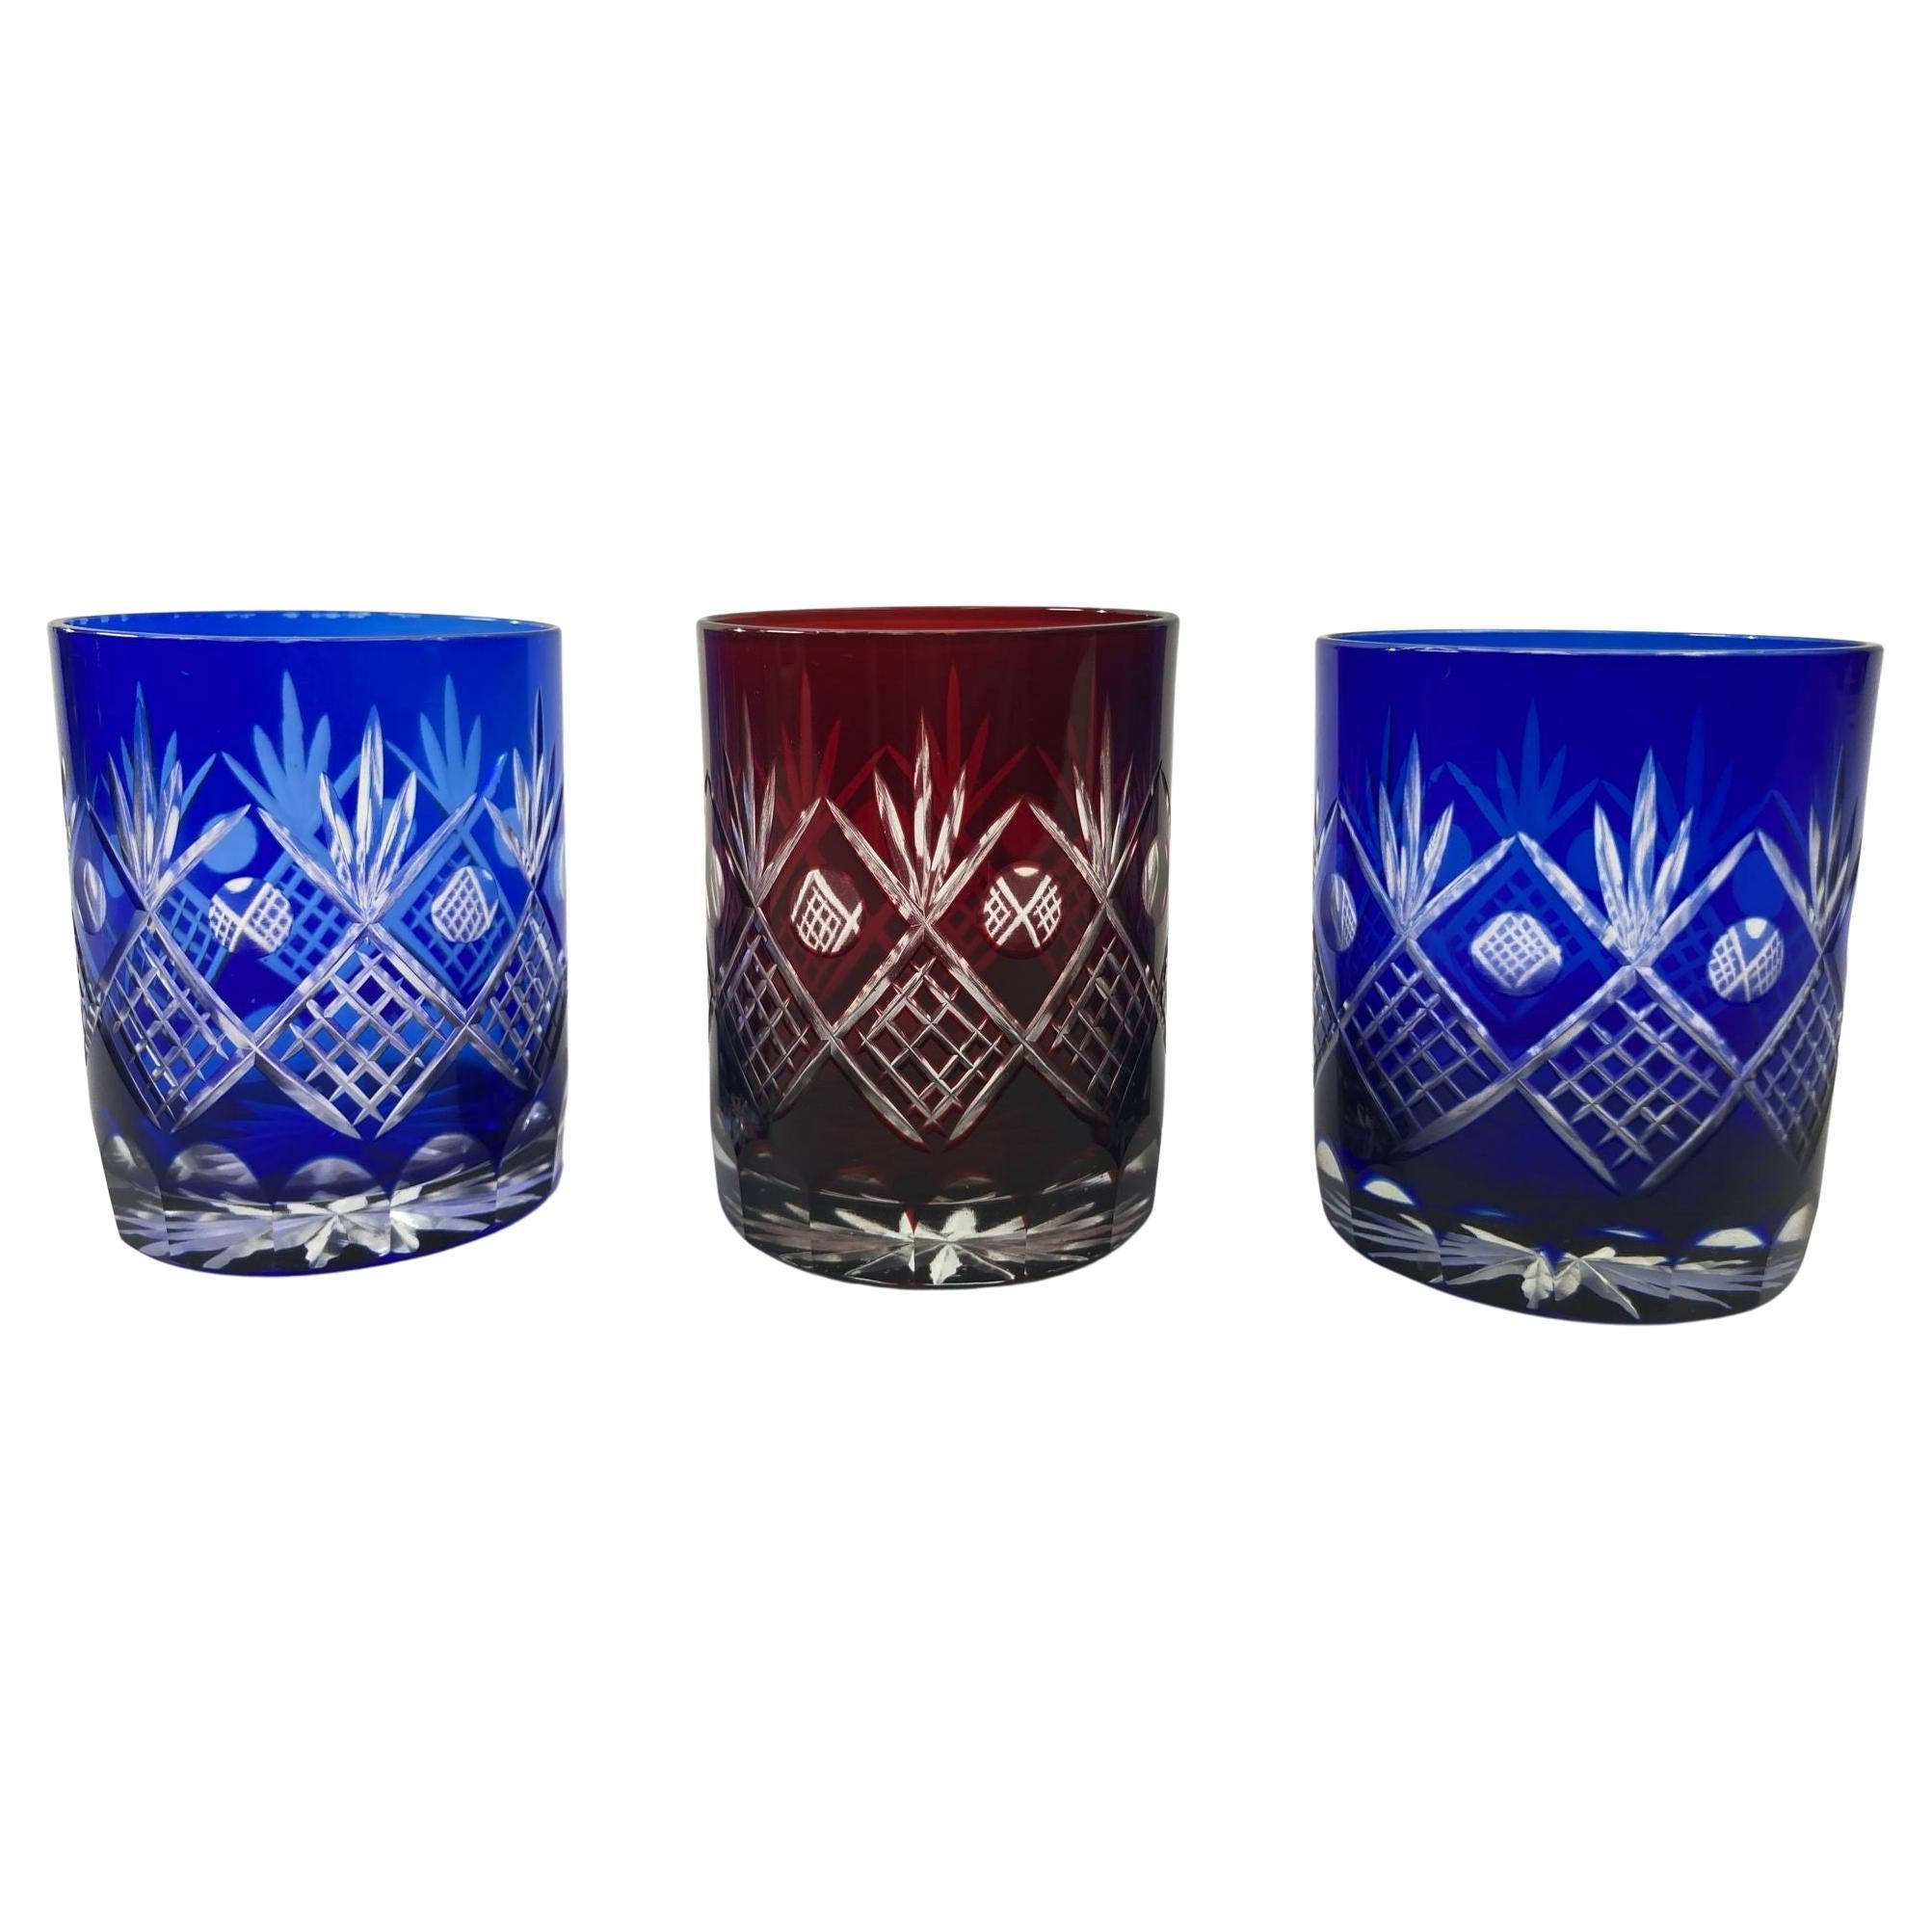 1970 Whiskey Glasses Tumbler Baccarat Style Blue and Red Cut Crystal Set of 3